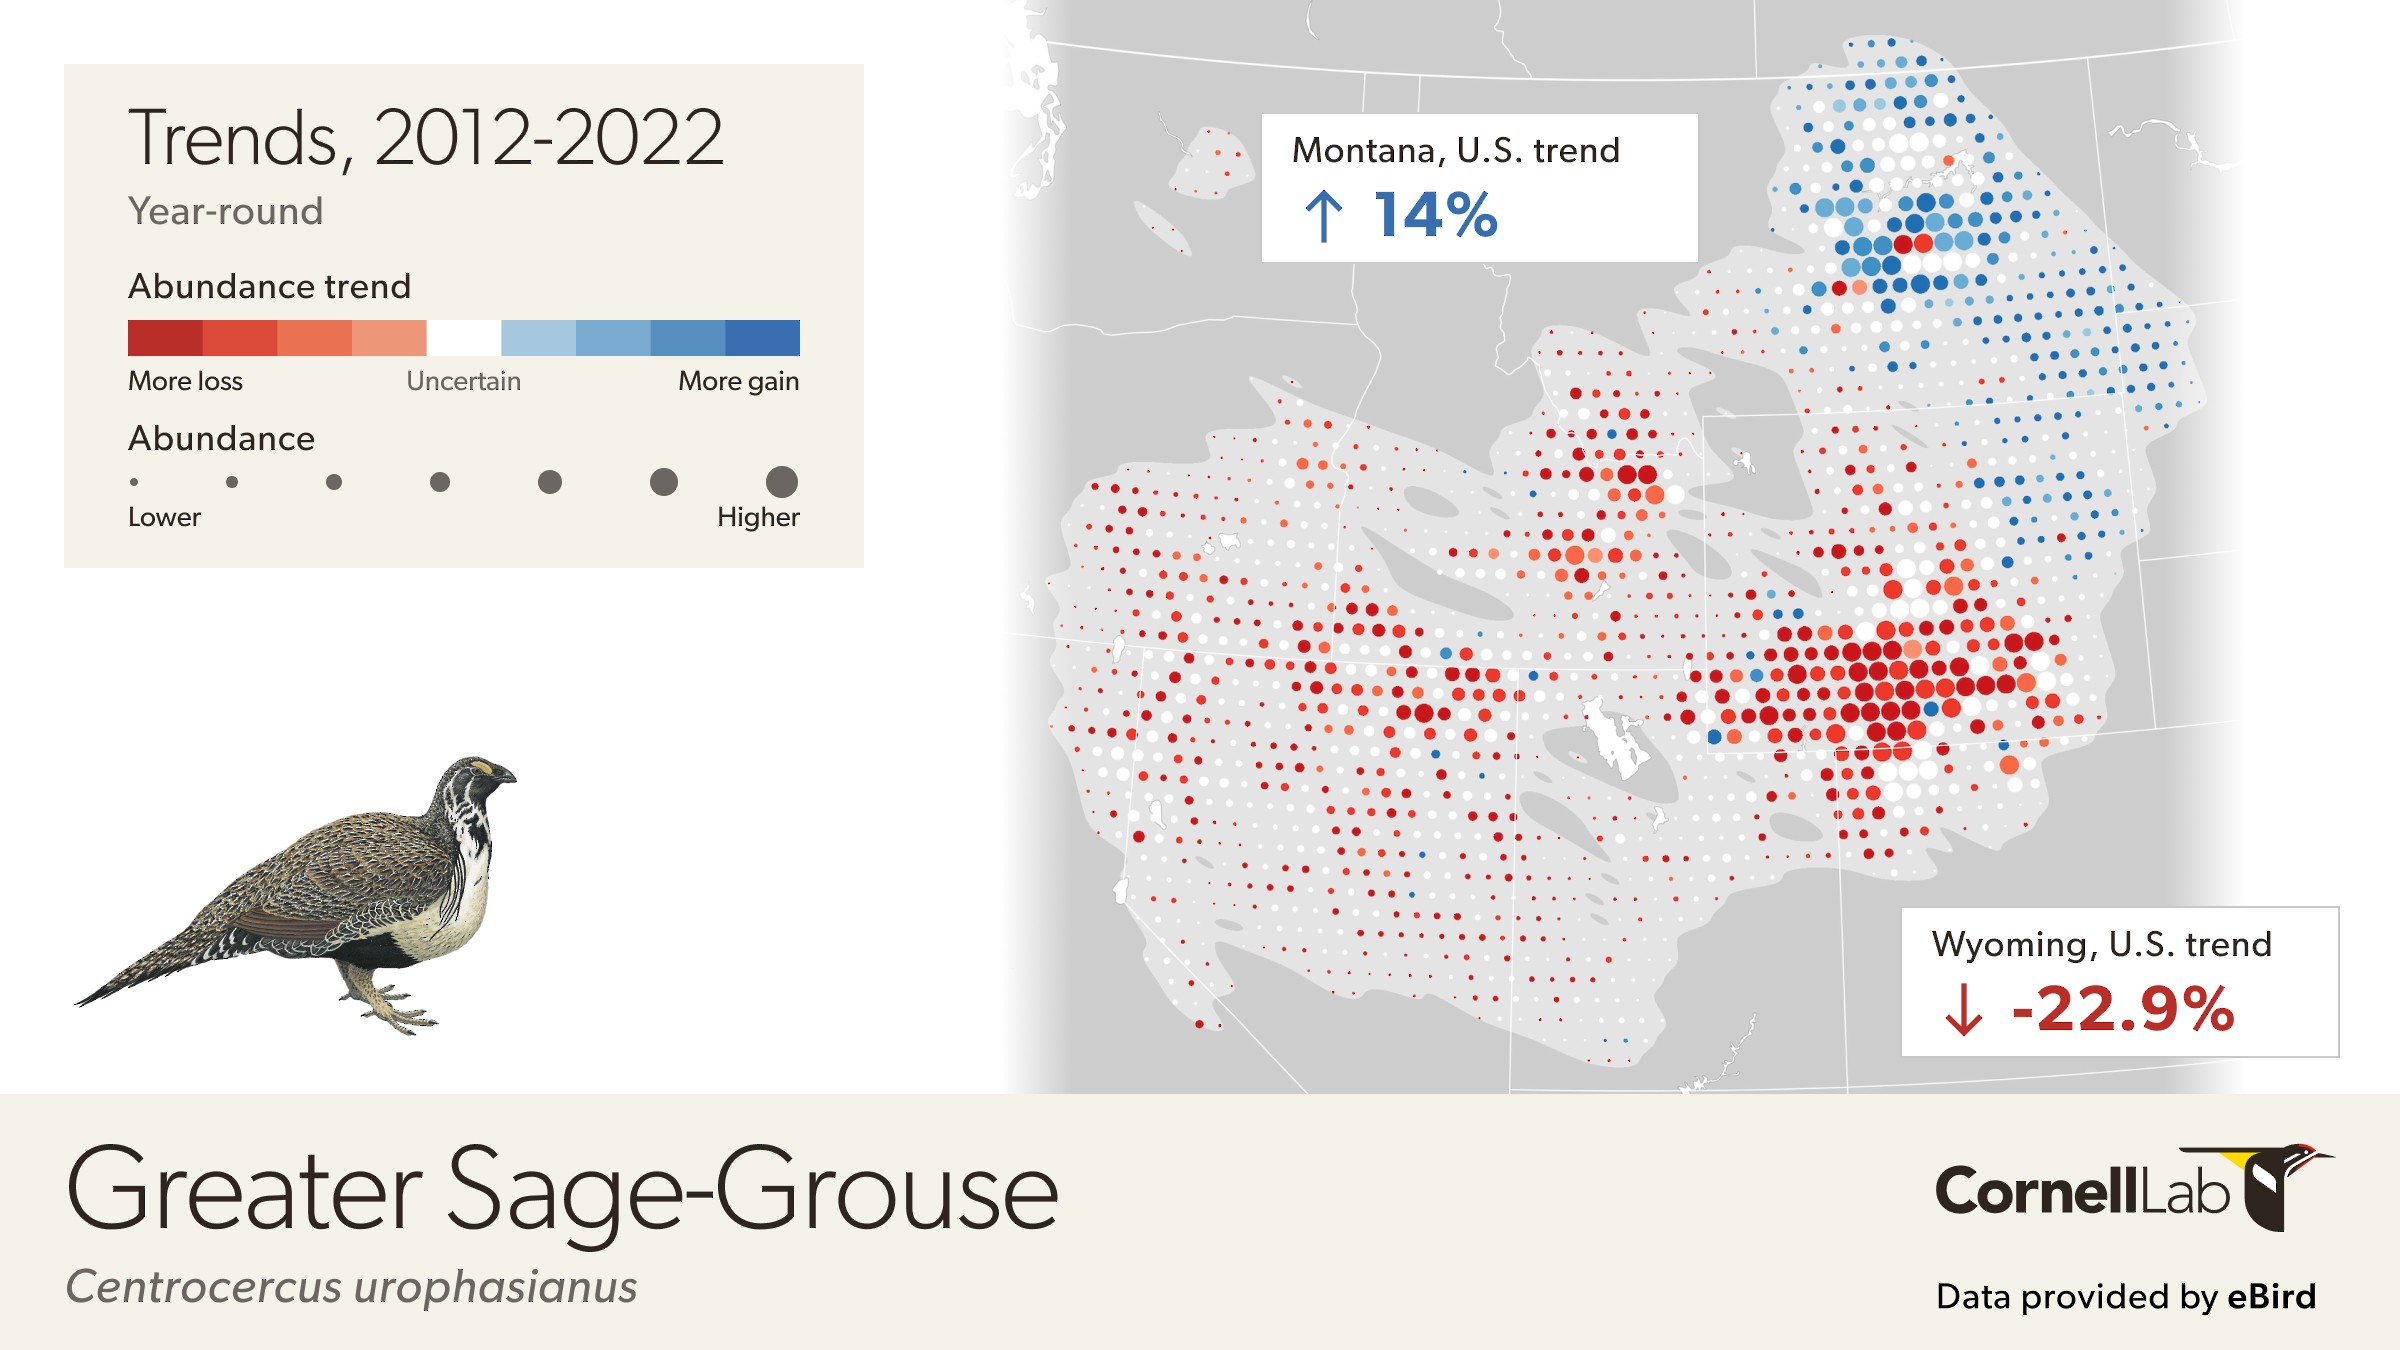 Trend map for the Greater Sage-Grouse showing a 22.9% decreasing trend for Wyoming and a 14% increasing trend for Montana.